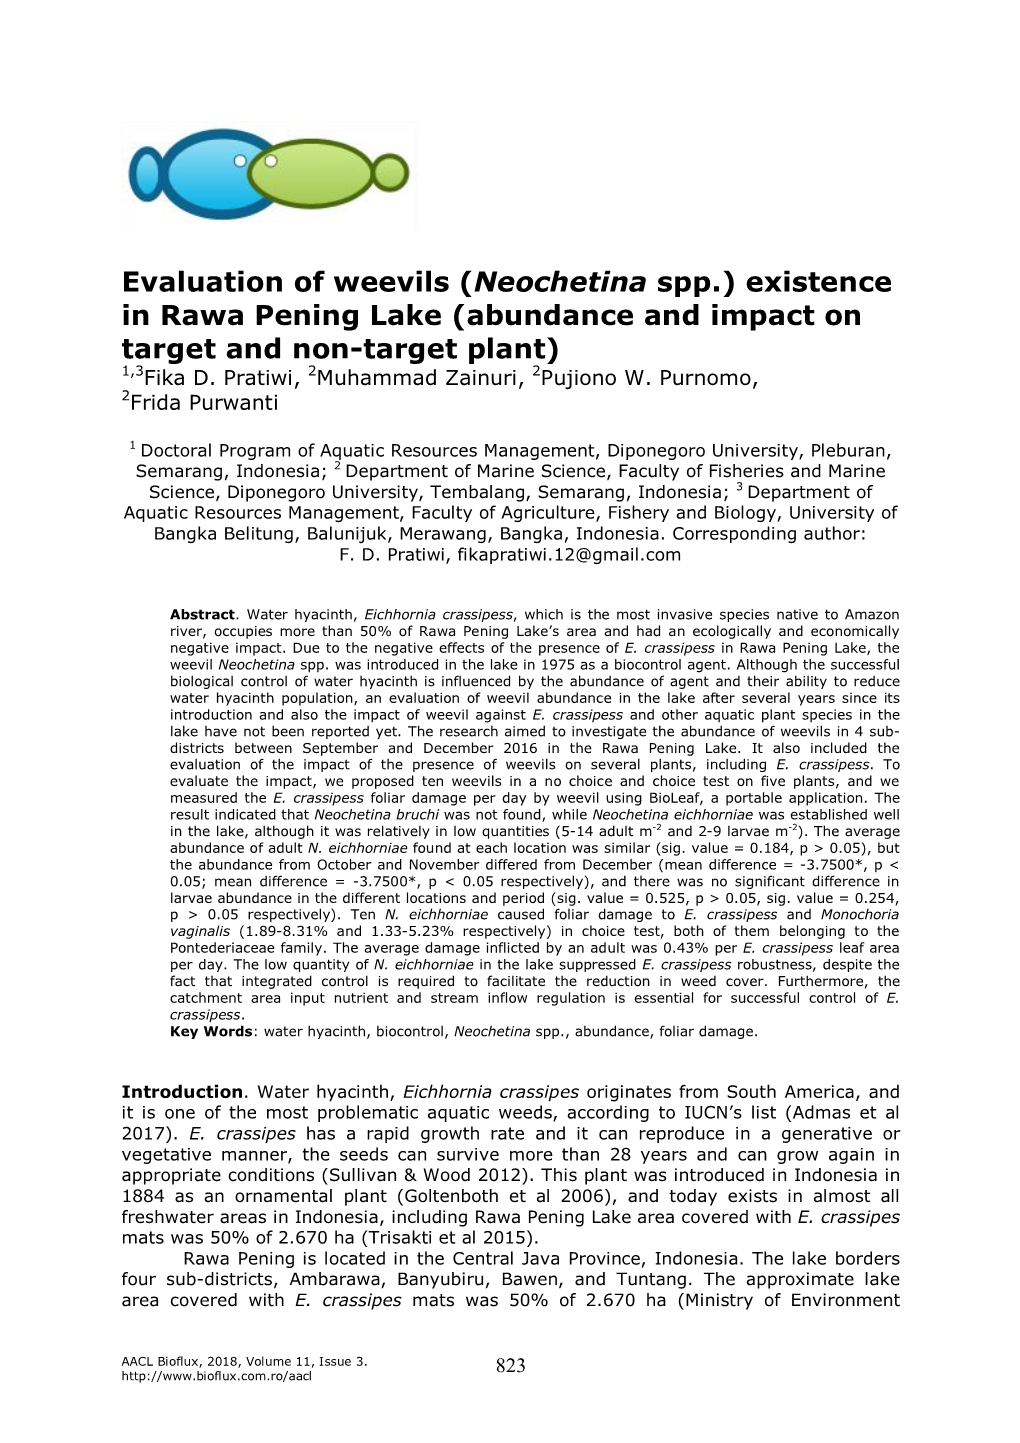 Evaluation of Weevils (Neochetina Spp.) Existence in Rawa Pening Lake (Abundance and Impact on Target and Non-Target Plant) 1,3Fika D